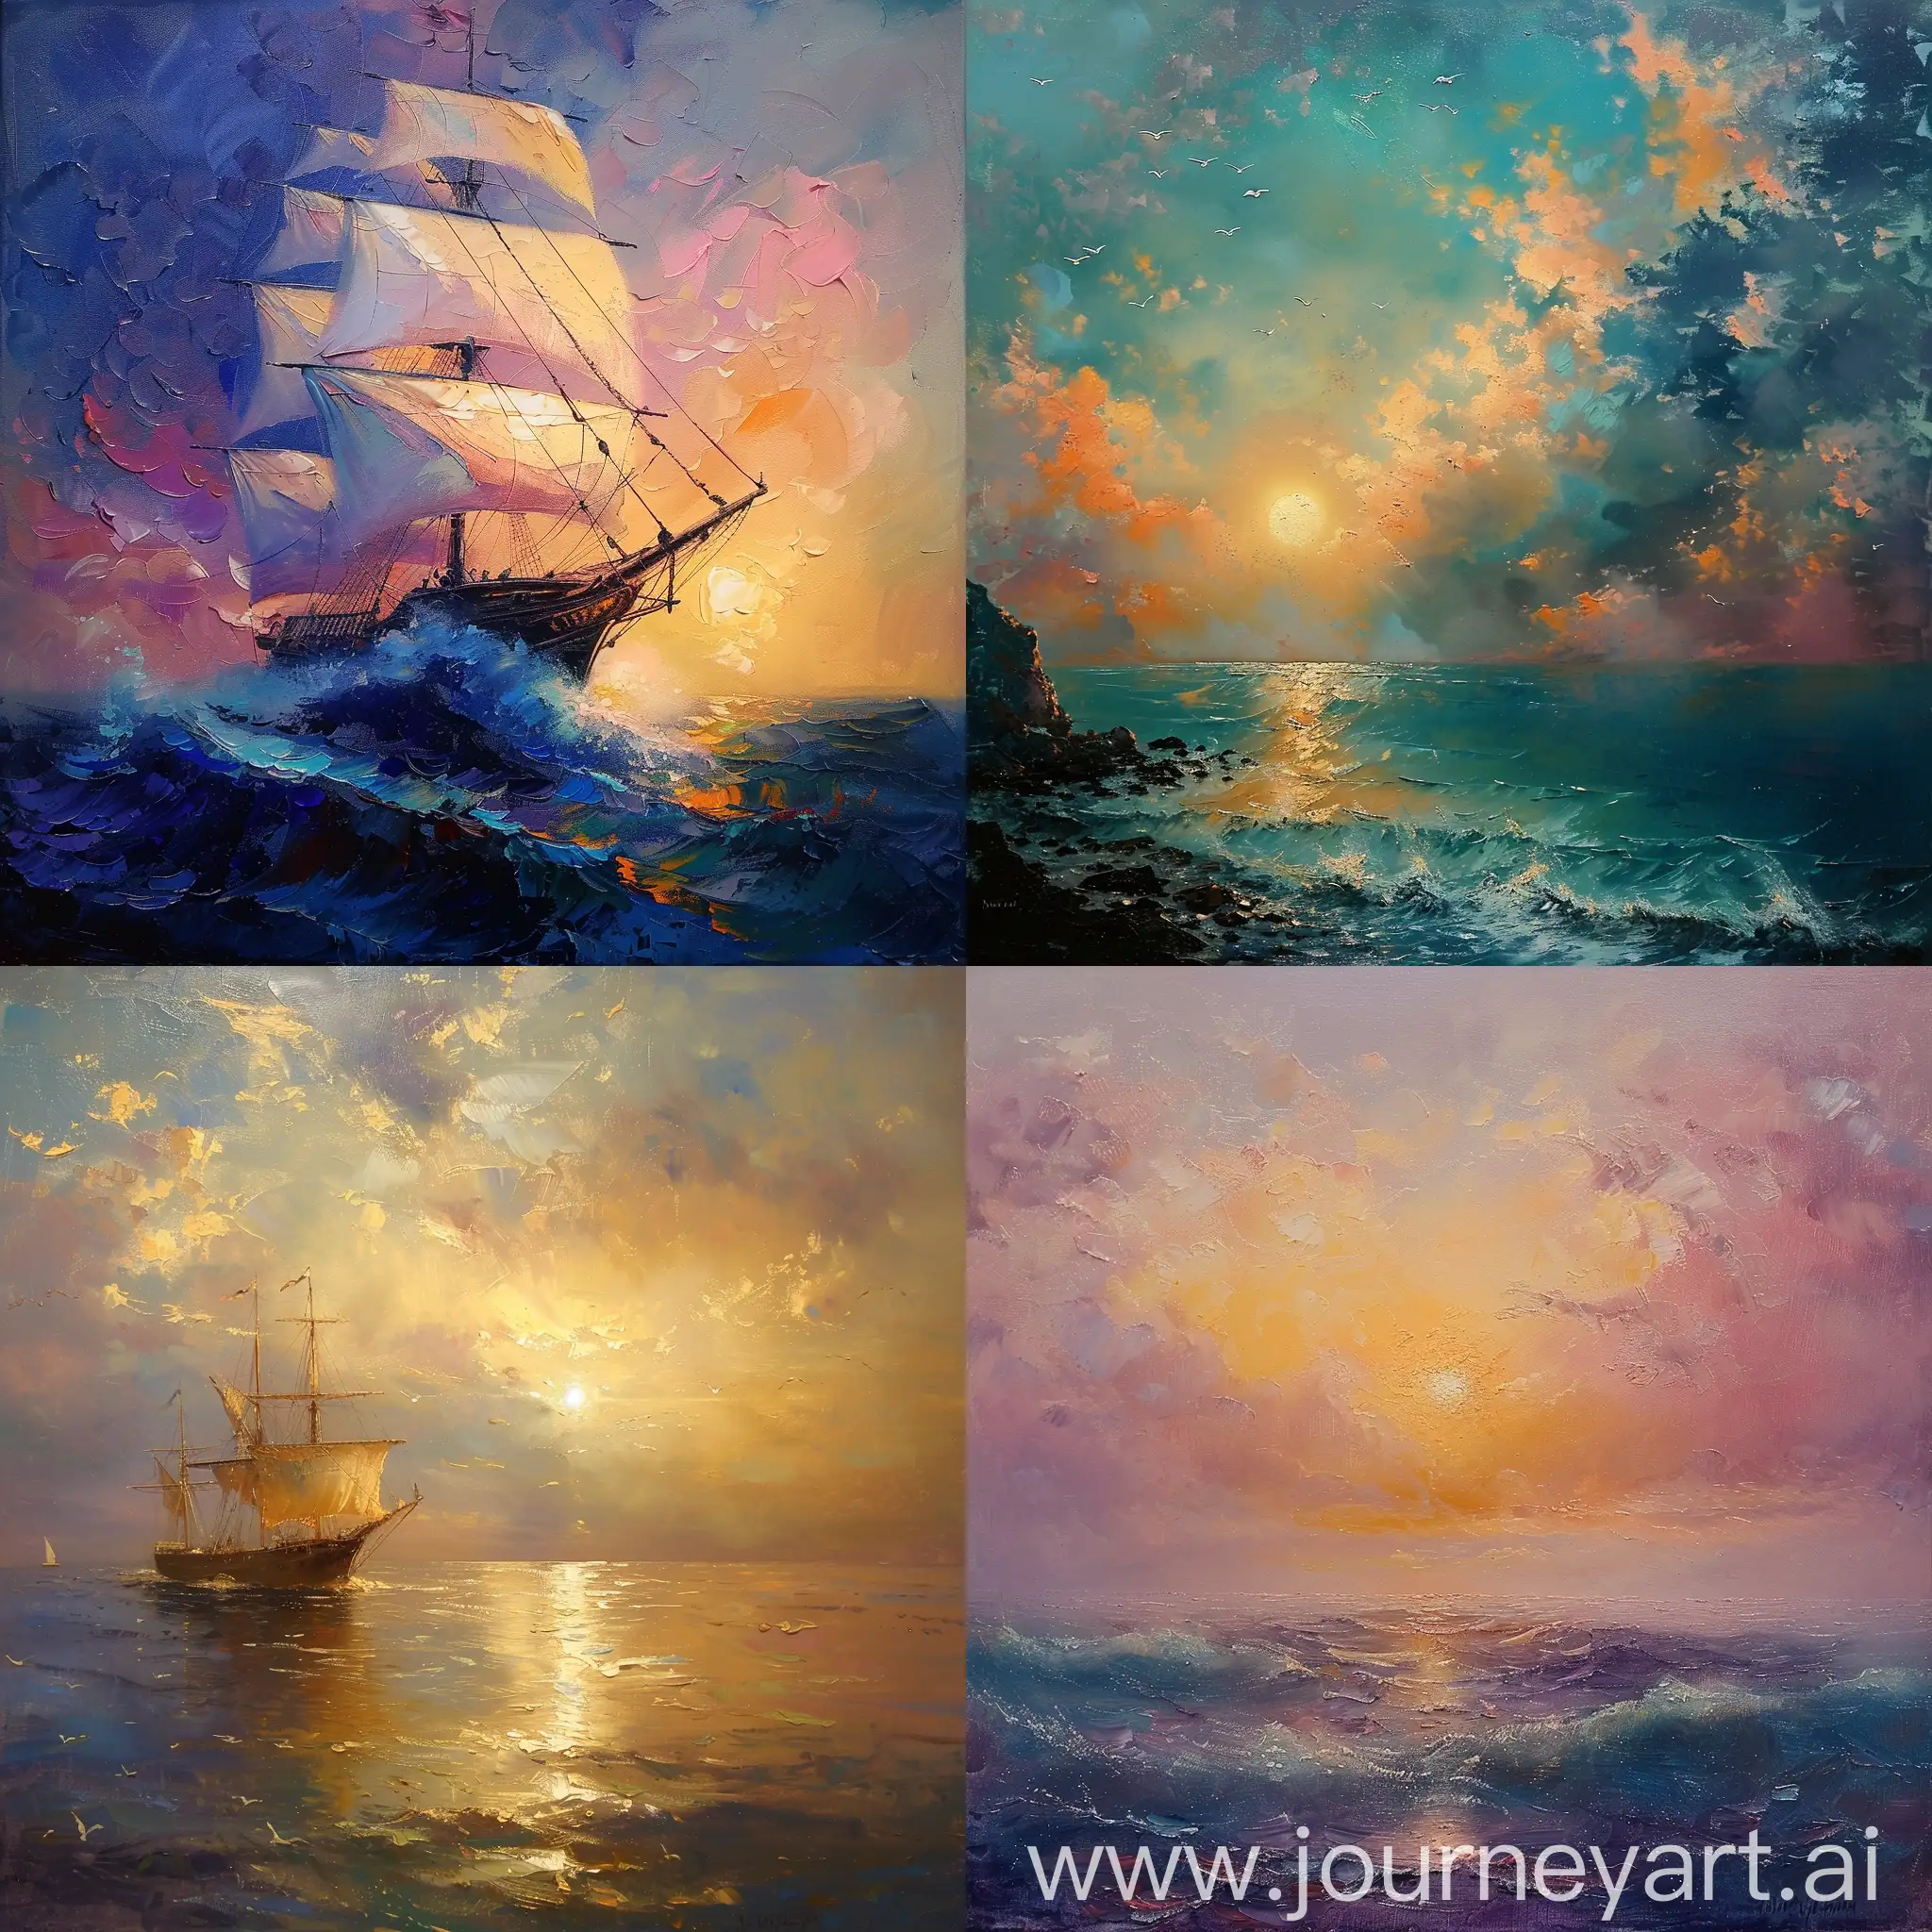 Ocean-Sunset-Painting-in-Aivazovsky-Style